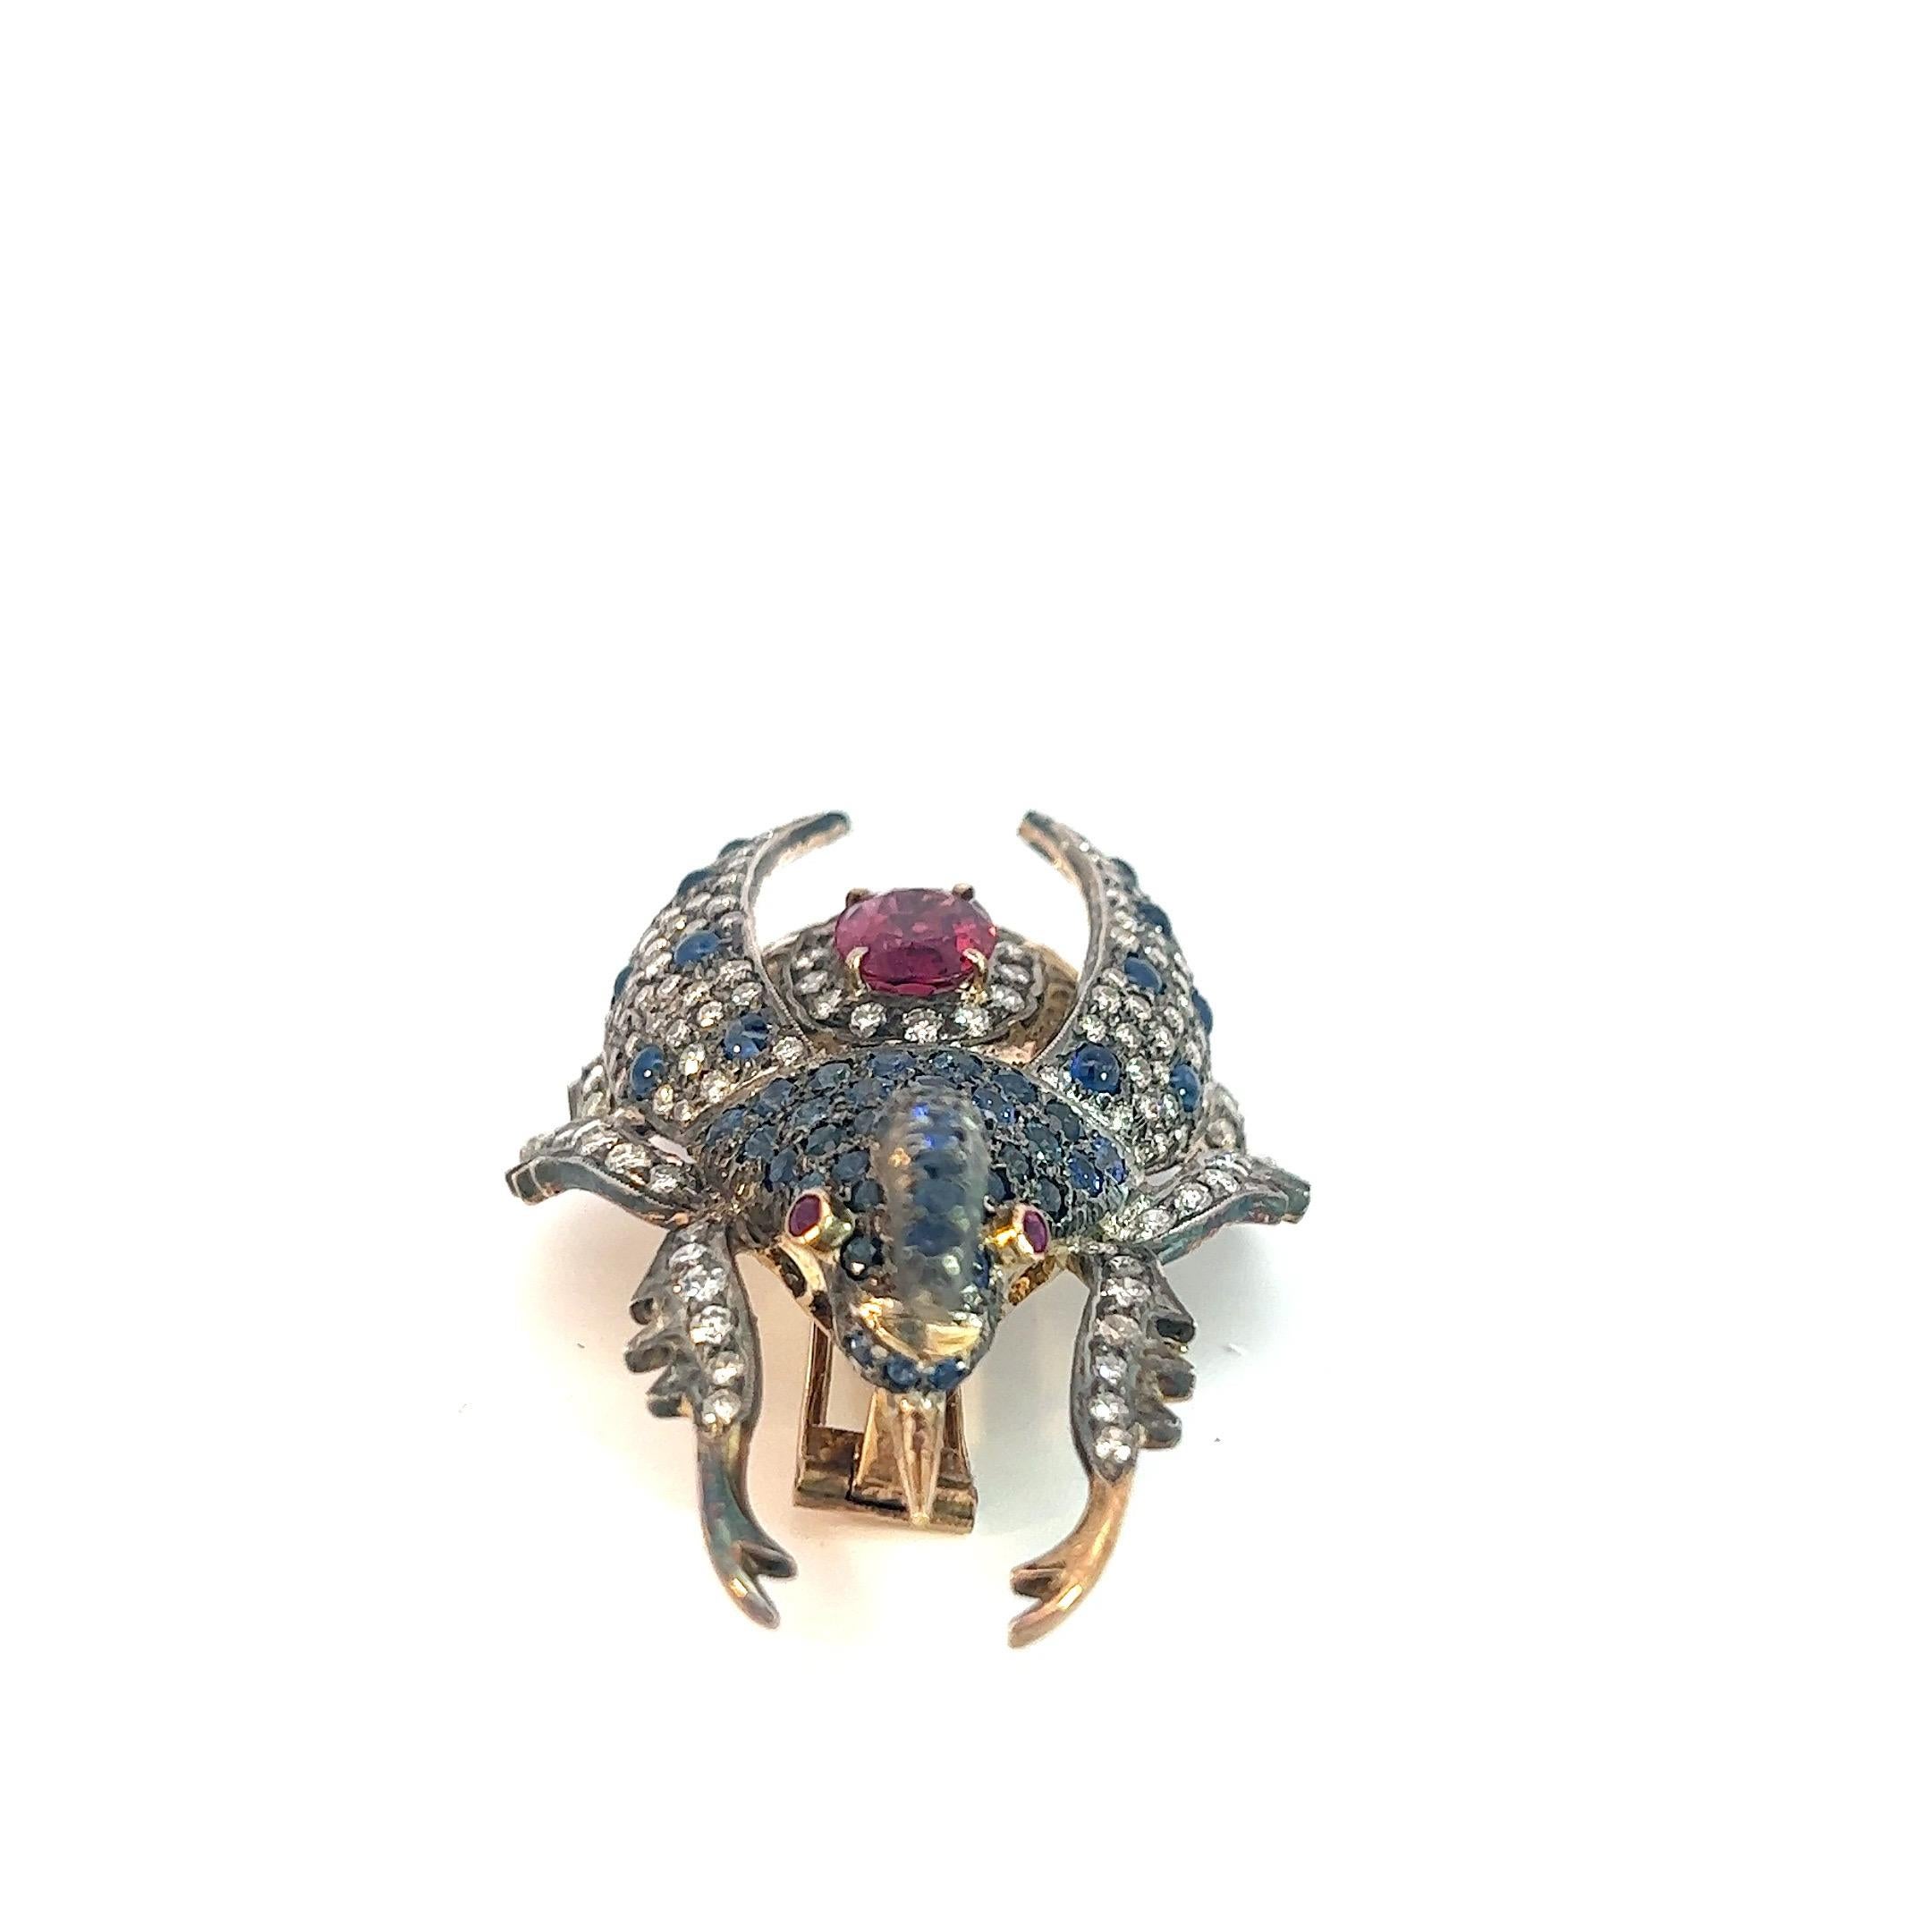 3 Carat Diamond, Sapphire Edwardian Style Beetle Pin with 3.5 Carat Spinel 18K  For Sale 2